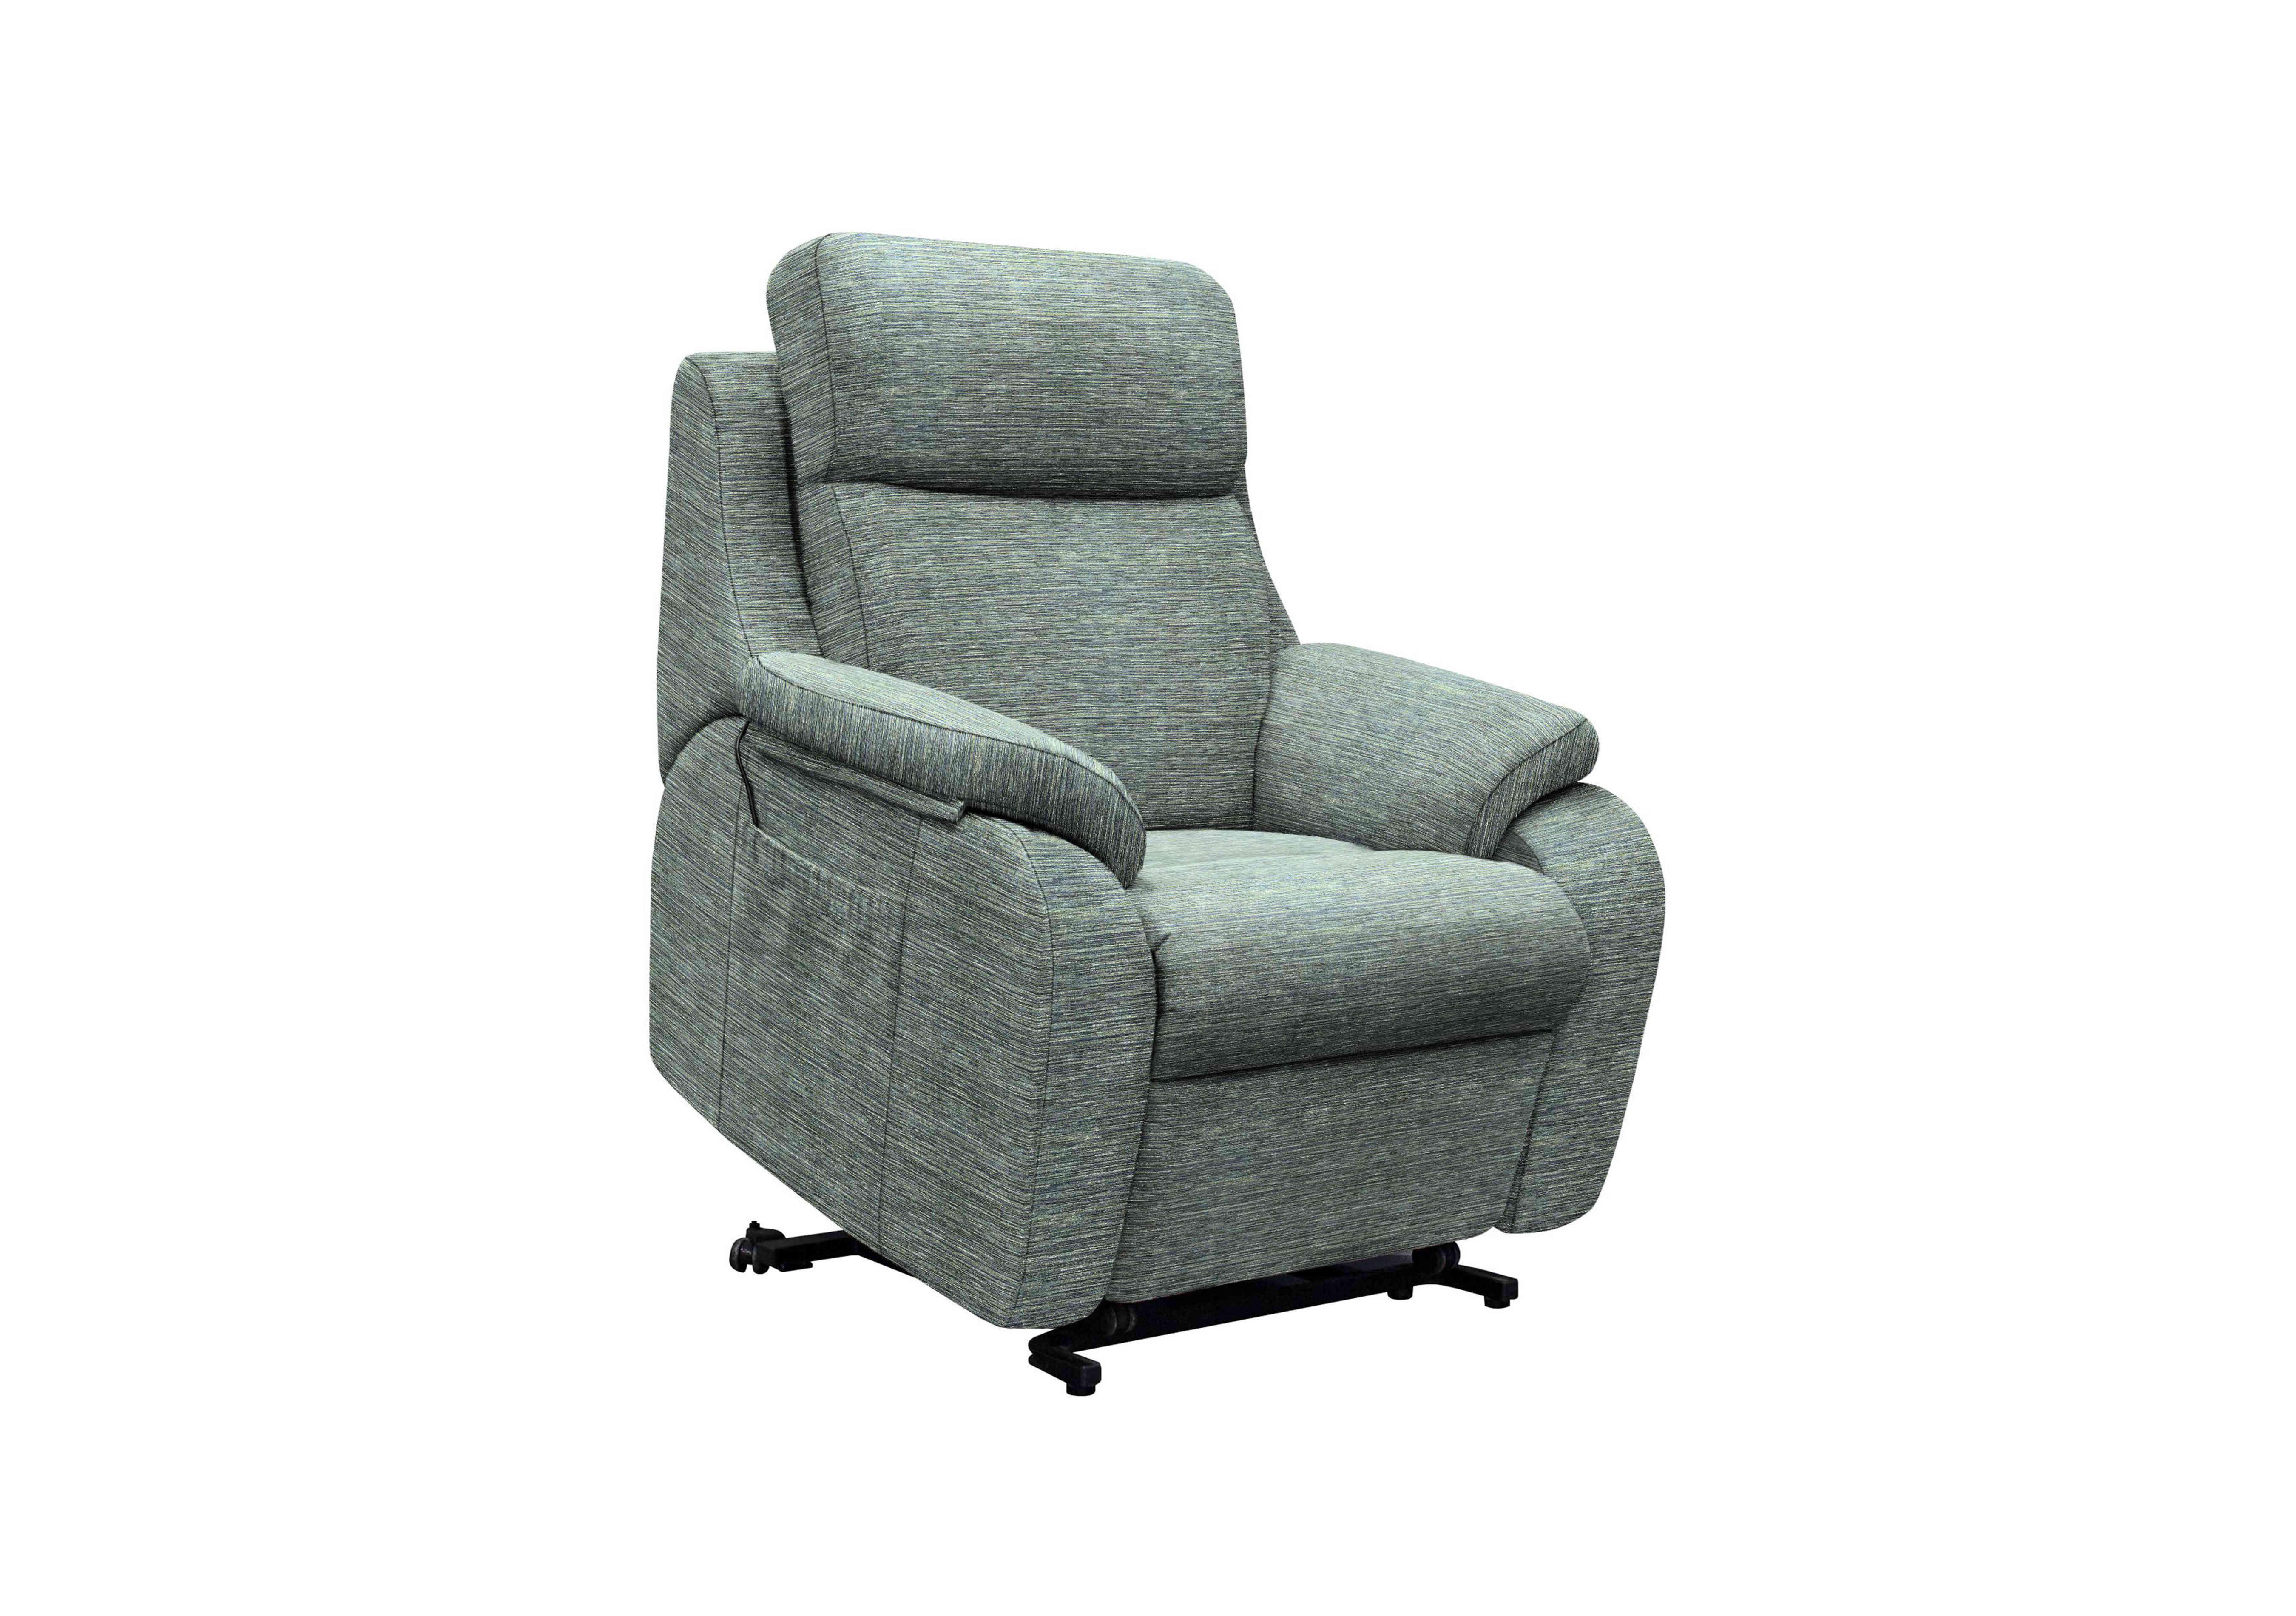 Kingsbury Large Fabric Lift and Rise Chair in B925 Waffle Marine on Furniture Village